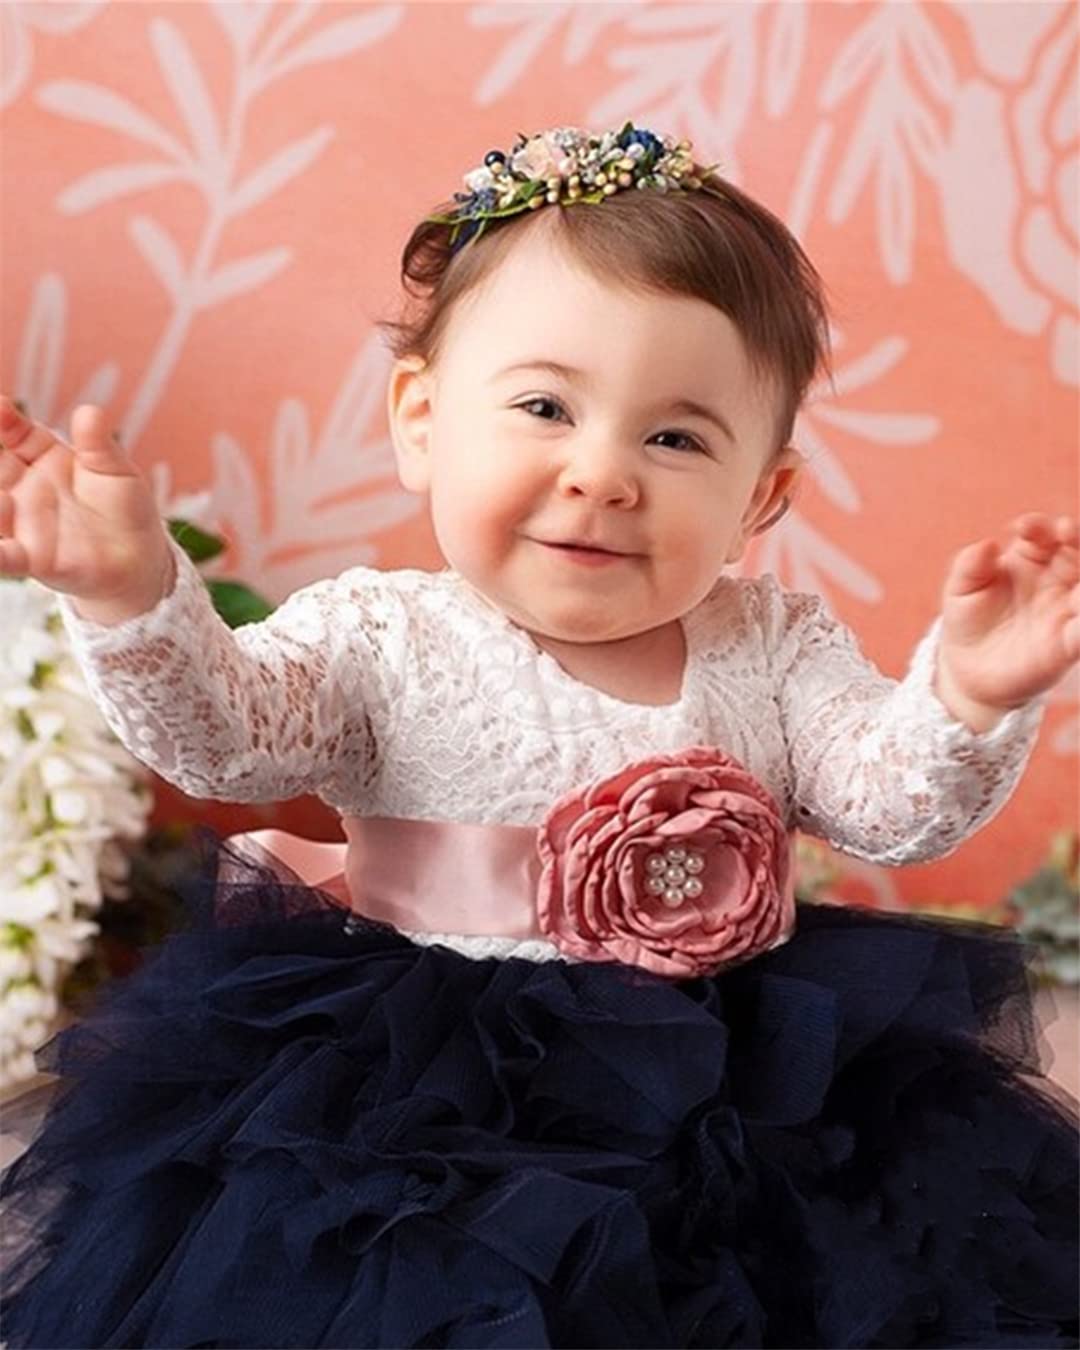 2Bunnies Flower Girl Dress Peony Lace Back A-Line Long Sleeve Tiered Tulle Short (Navy) - 2BUNNIES